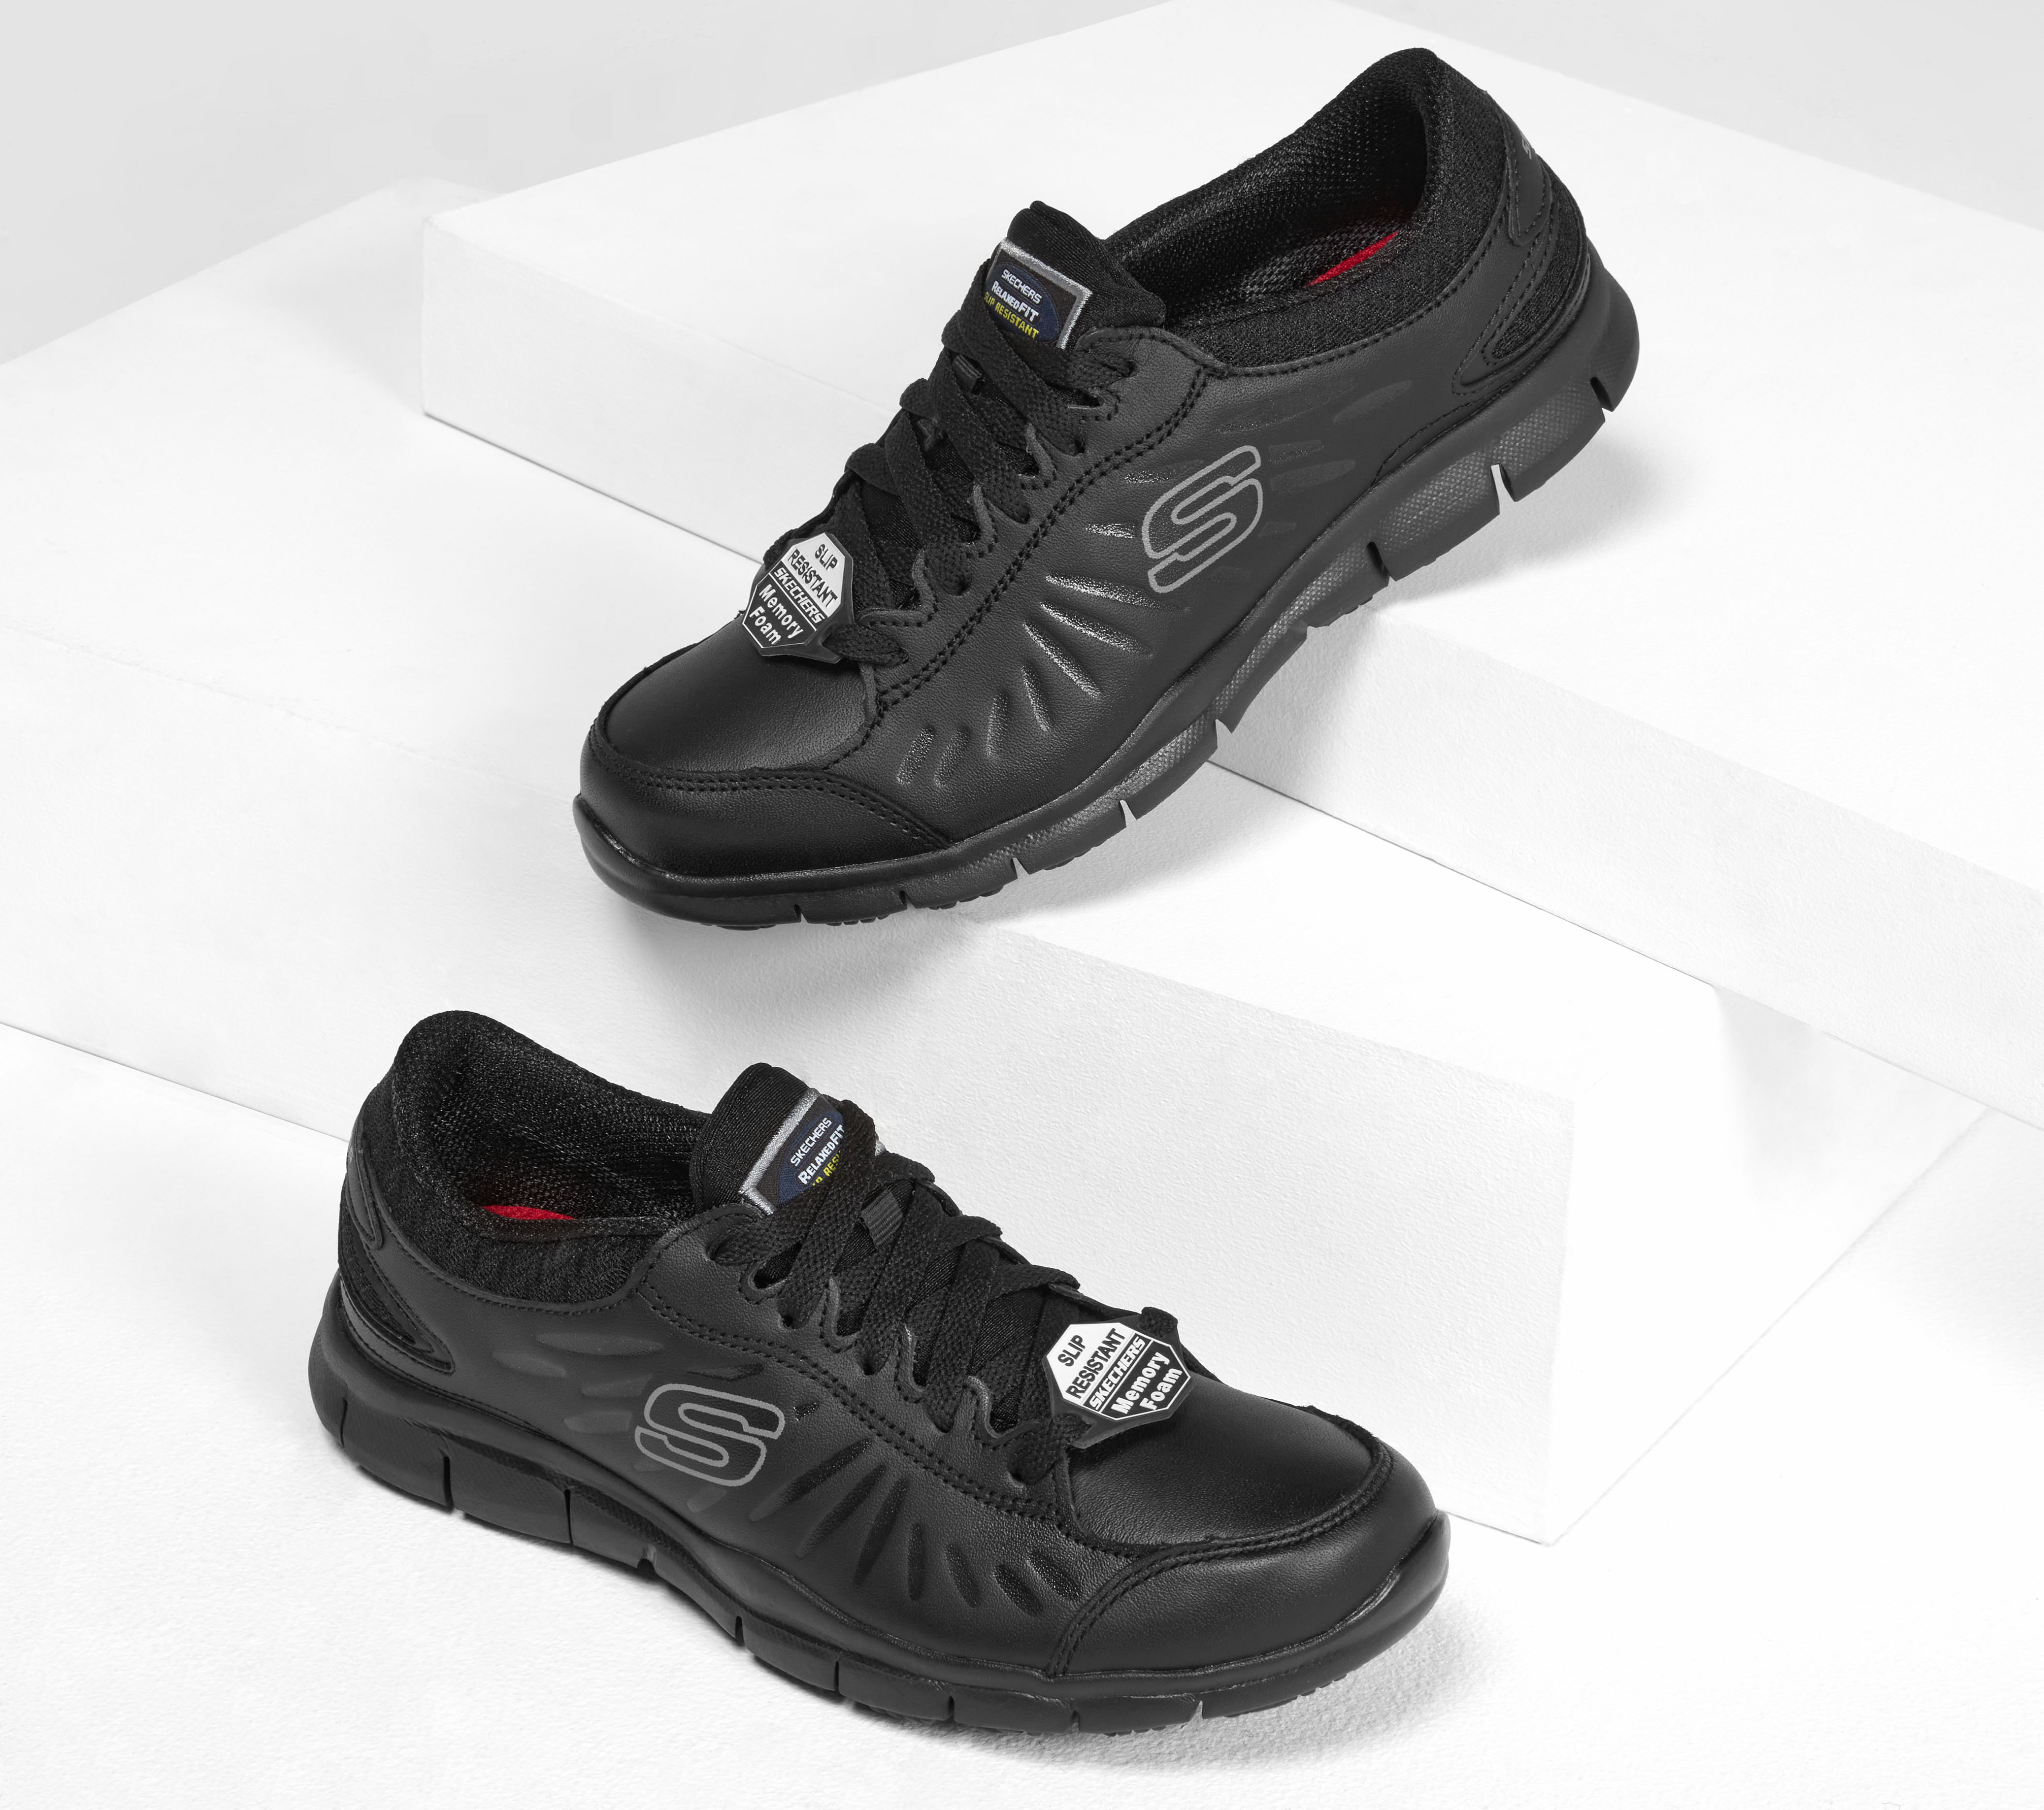 skechers black leather tennis shoes